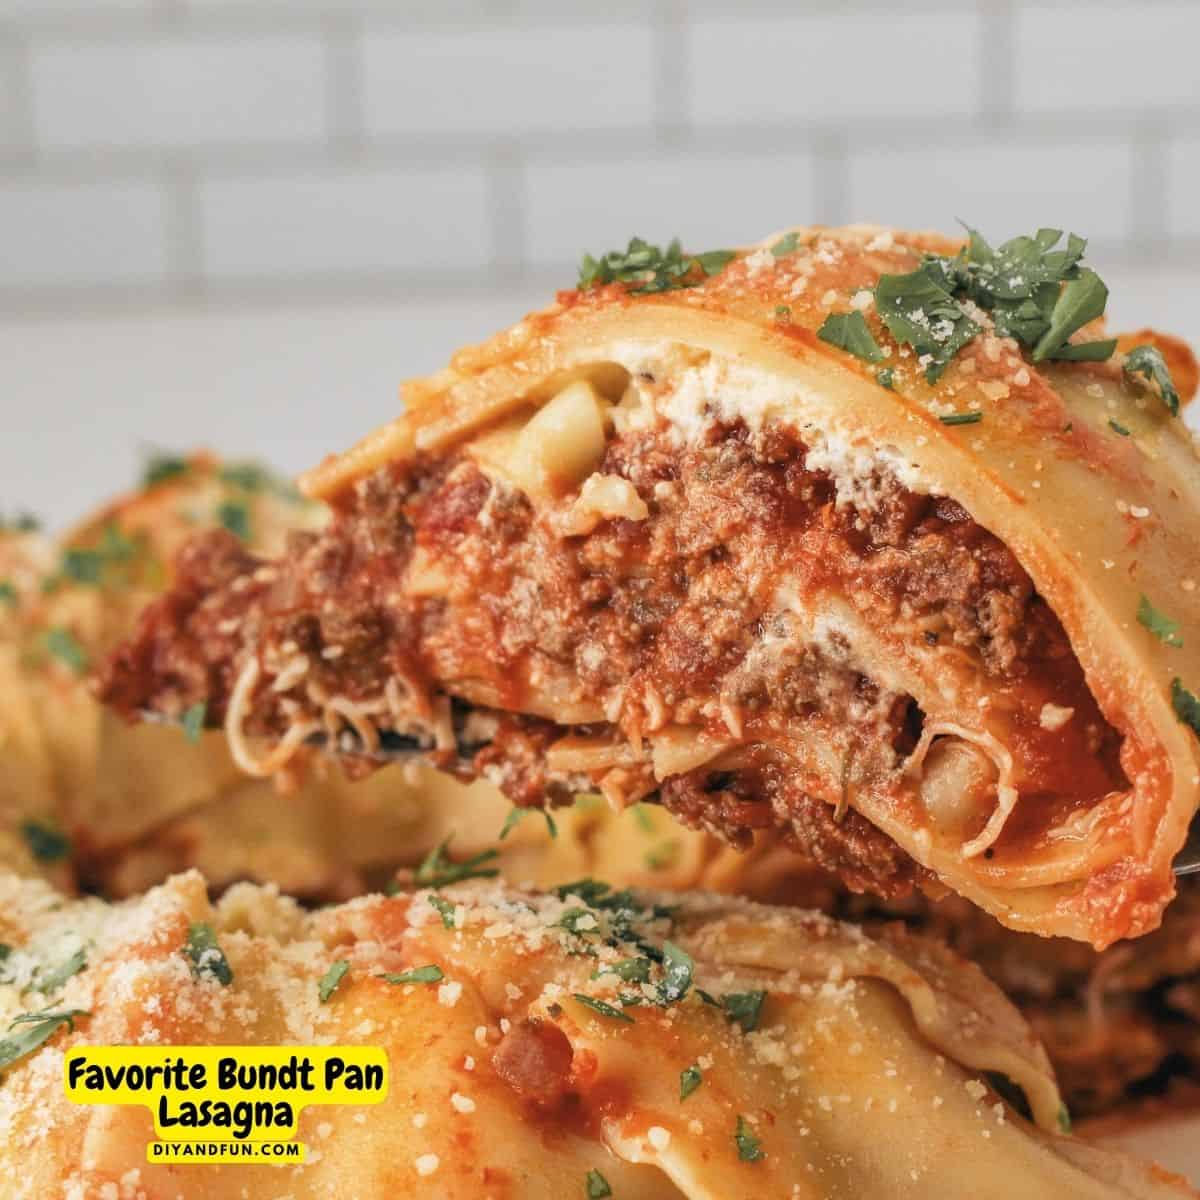 Favorite Bundt Pan Lasagna, a delicious and flavorful Italian pasta dinner recipe made in a bundt style baking pan. 